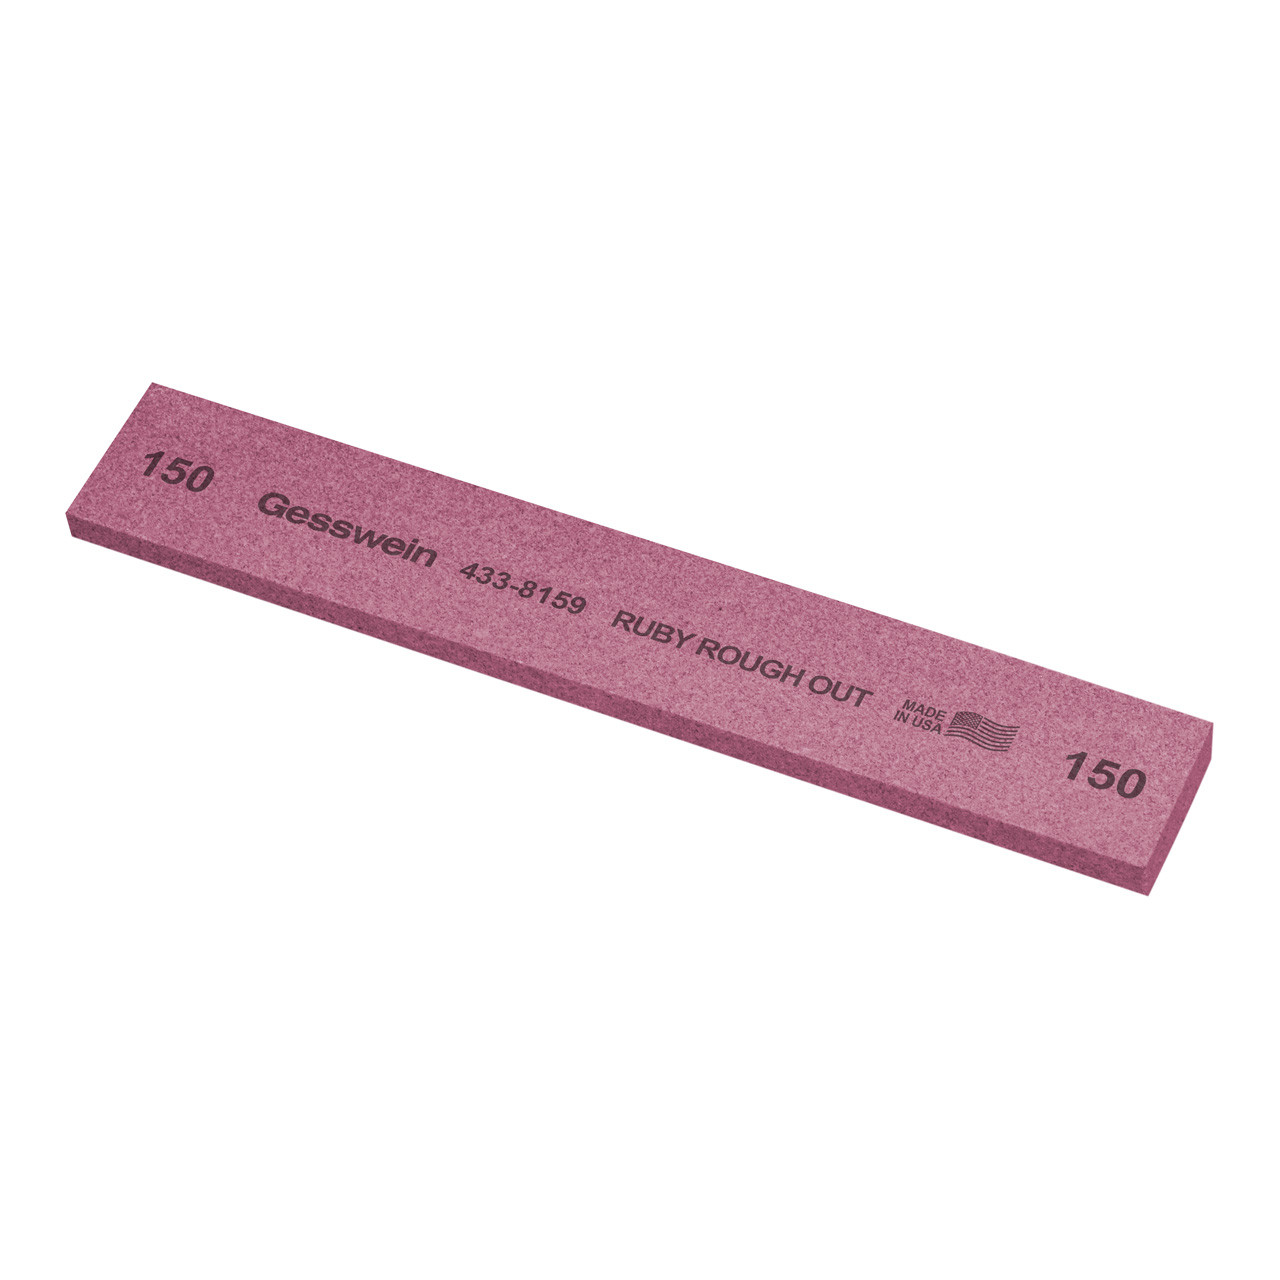 Gesswein® Ruby Rough Out Stones - 1" x 1/4" x 6", 150 Grit  (Pkg. of 6)